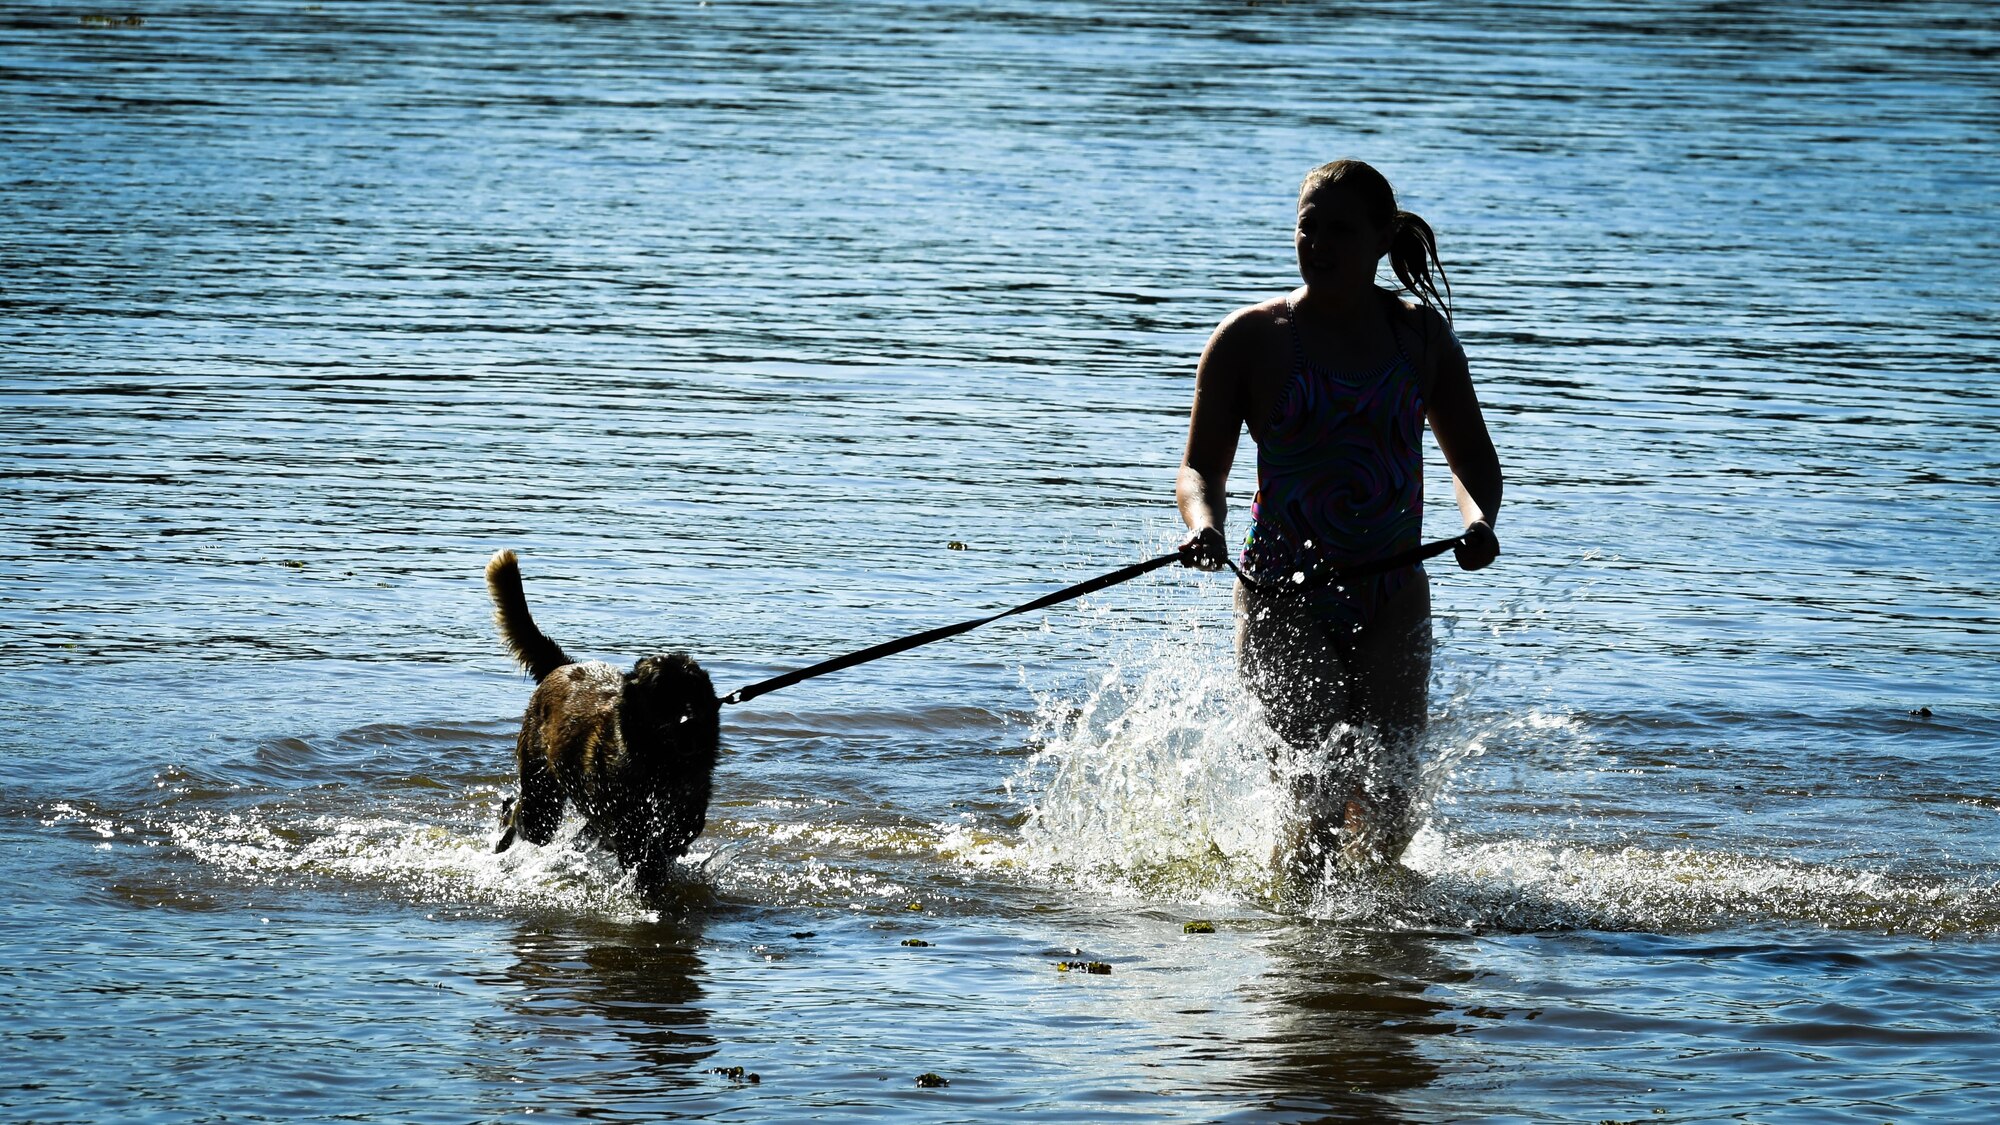 Staff Sgt. Briana Hartwig, 2nd Security Forces Squadron military working dog handler, walks MWD Zzeki in the Black Bayou Lake before a water aggression training session at Benton, La., Sept. 6, 2017. Handlers attempt to conduct water aggression training at a minimum of twice a year. The training session taught MWDs to chase and stop suspects in a body of water without hesitation